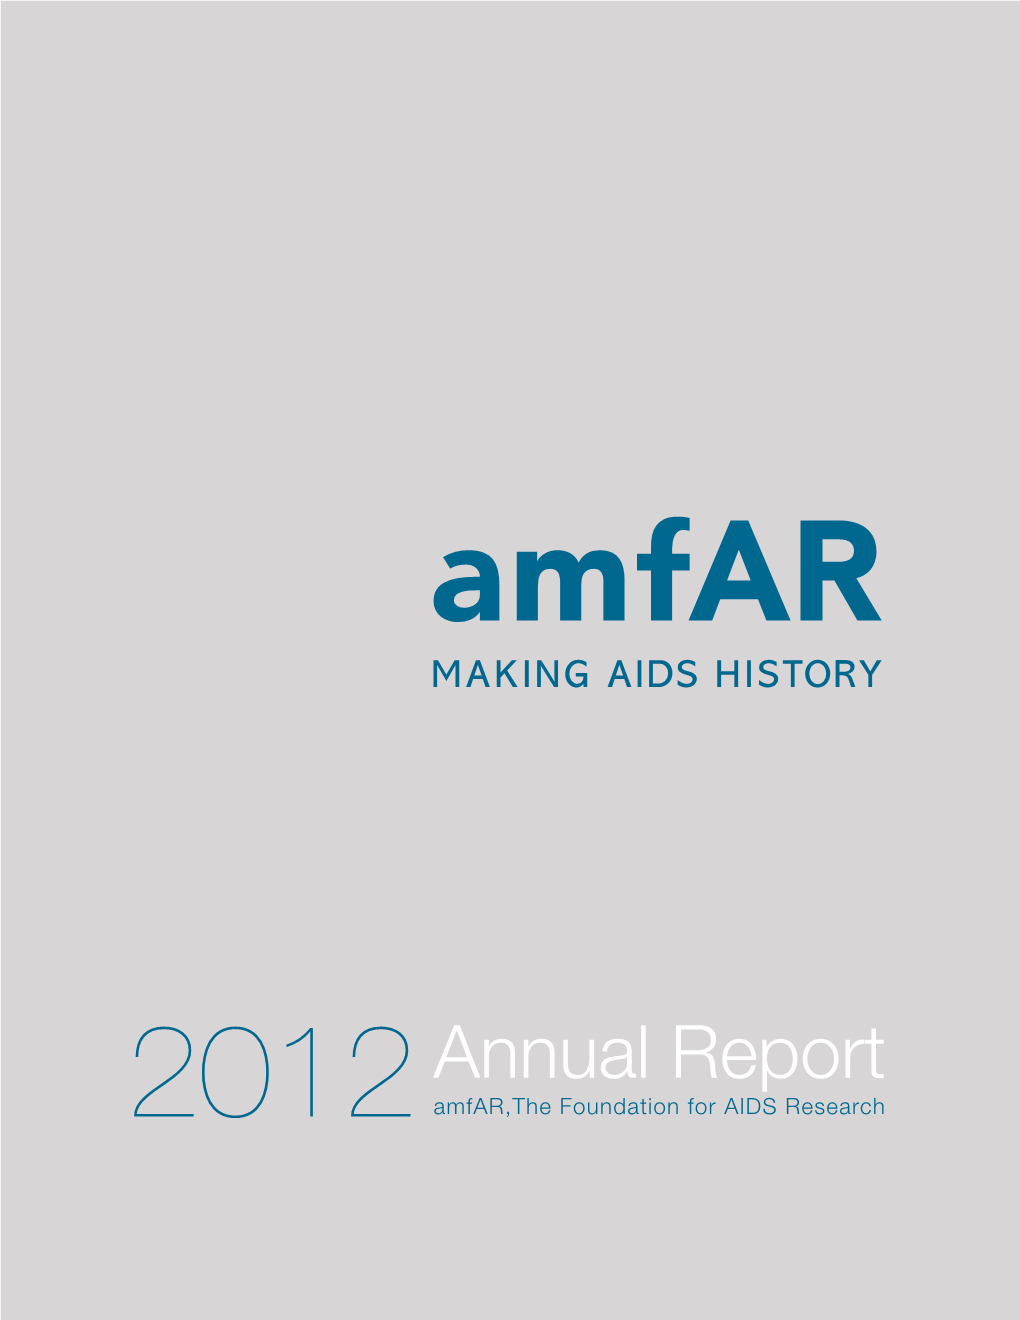 Annual Report 2012 Amfar,The Foundation for AIDS Research Contents